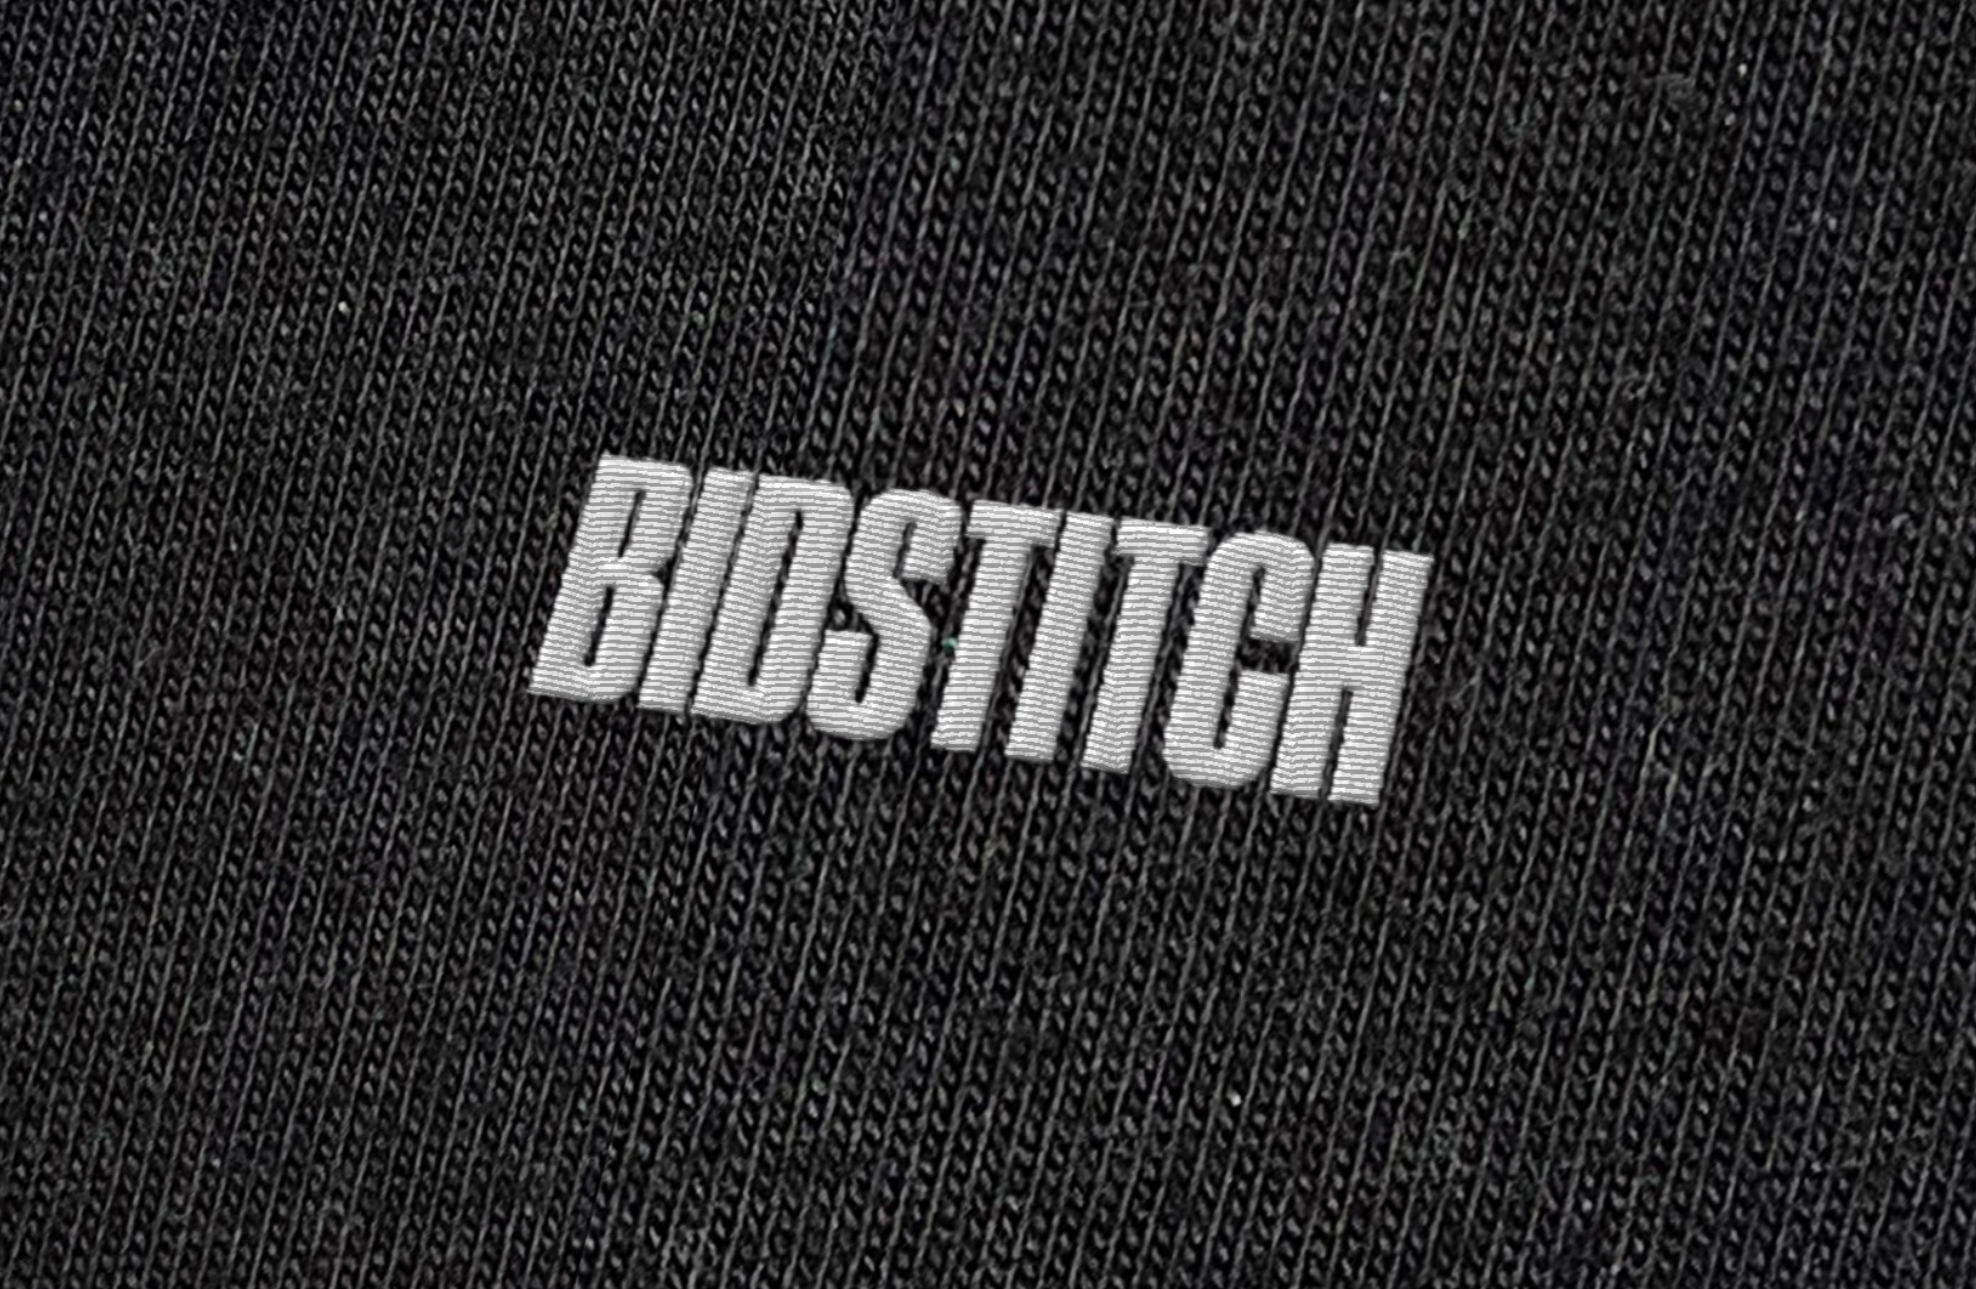 TaW Design work for Bidstitch, example1